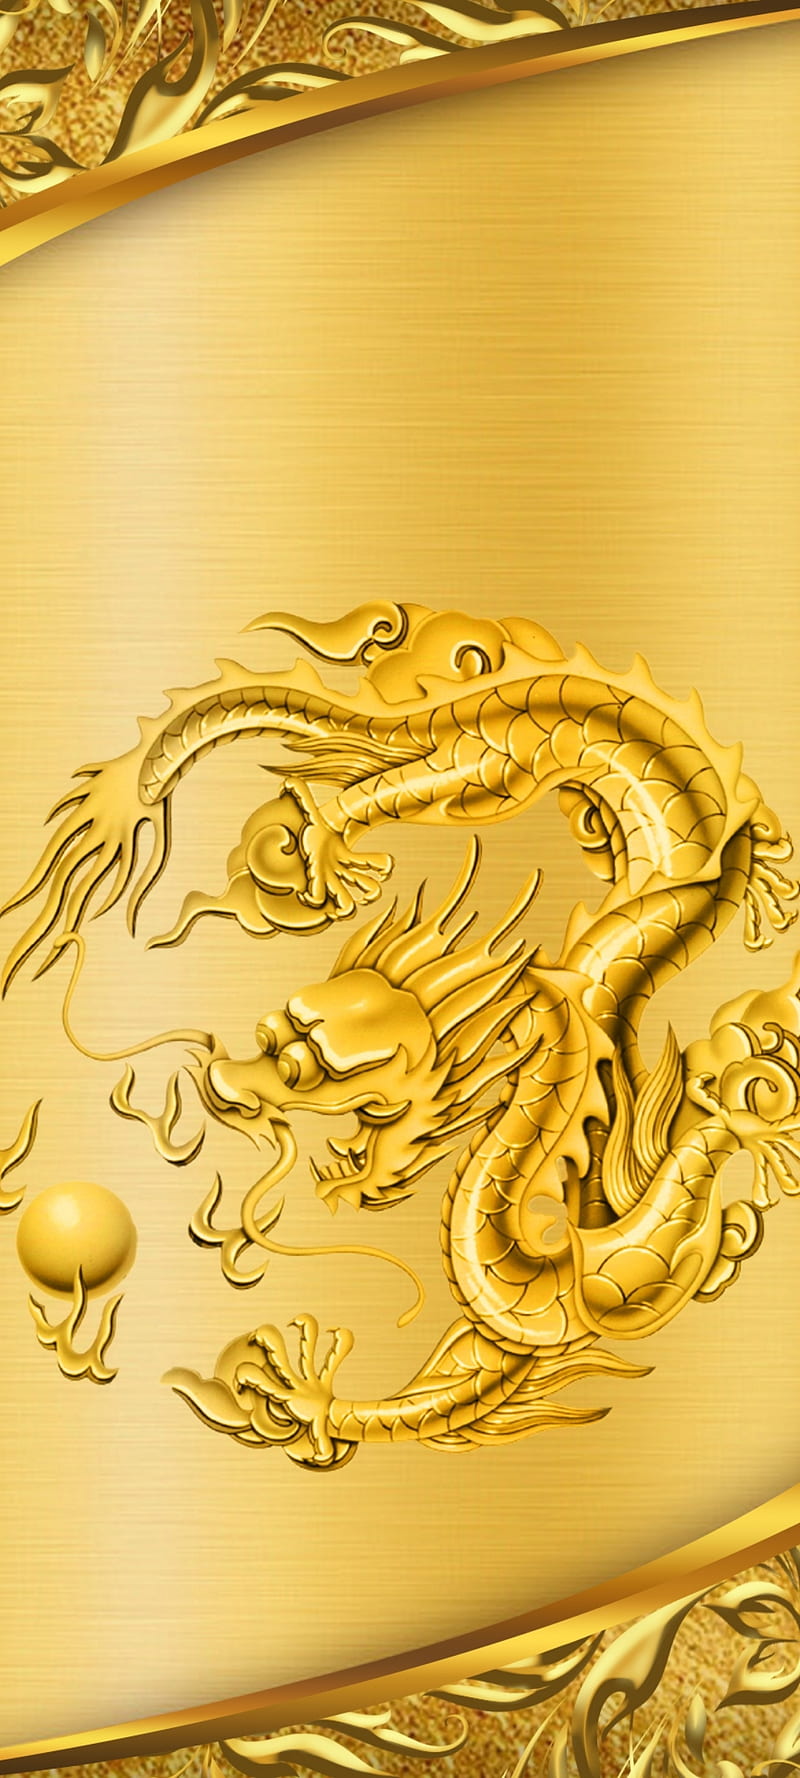 1920x1080px, 1080P free download Luxury Golden dragon, gold